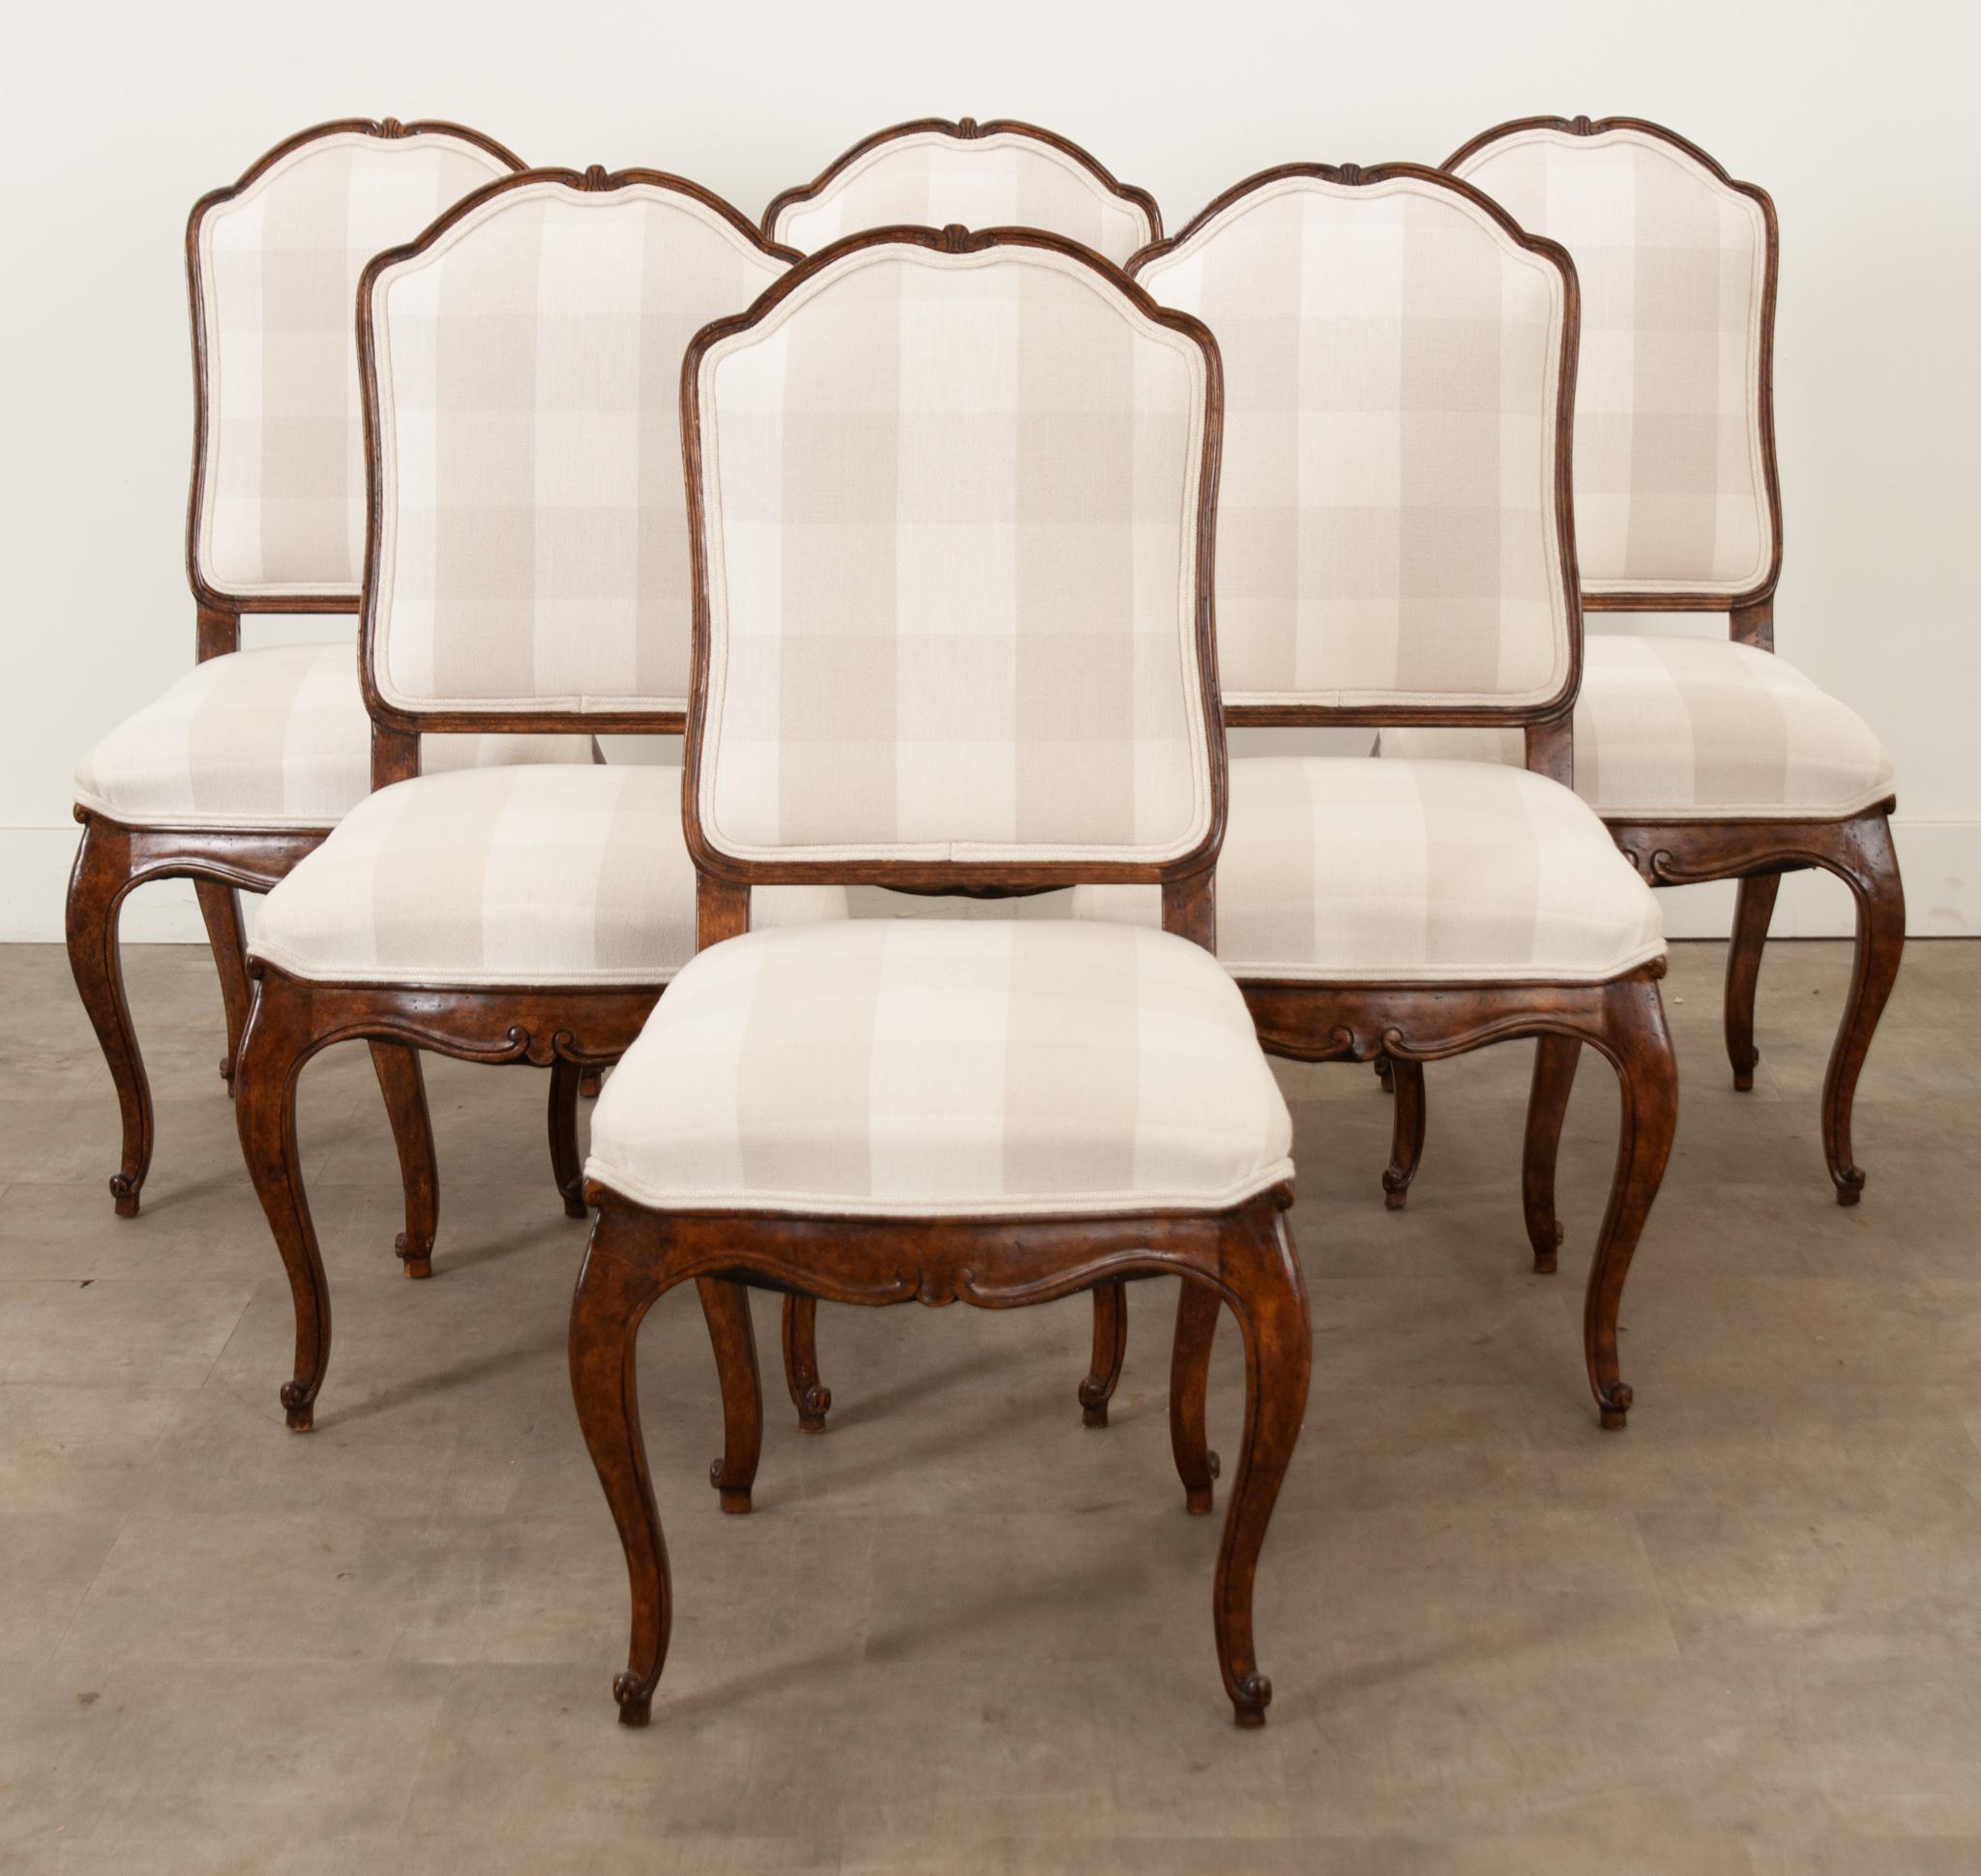 A charming set of six vintage reproduction dining chairs, made towards the end of the 20th century, in France. The chairs are made of mahogany, and are upholstered with a neutral, gingham-patterned woven fabric, which is trimmed with double welt